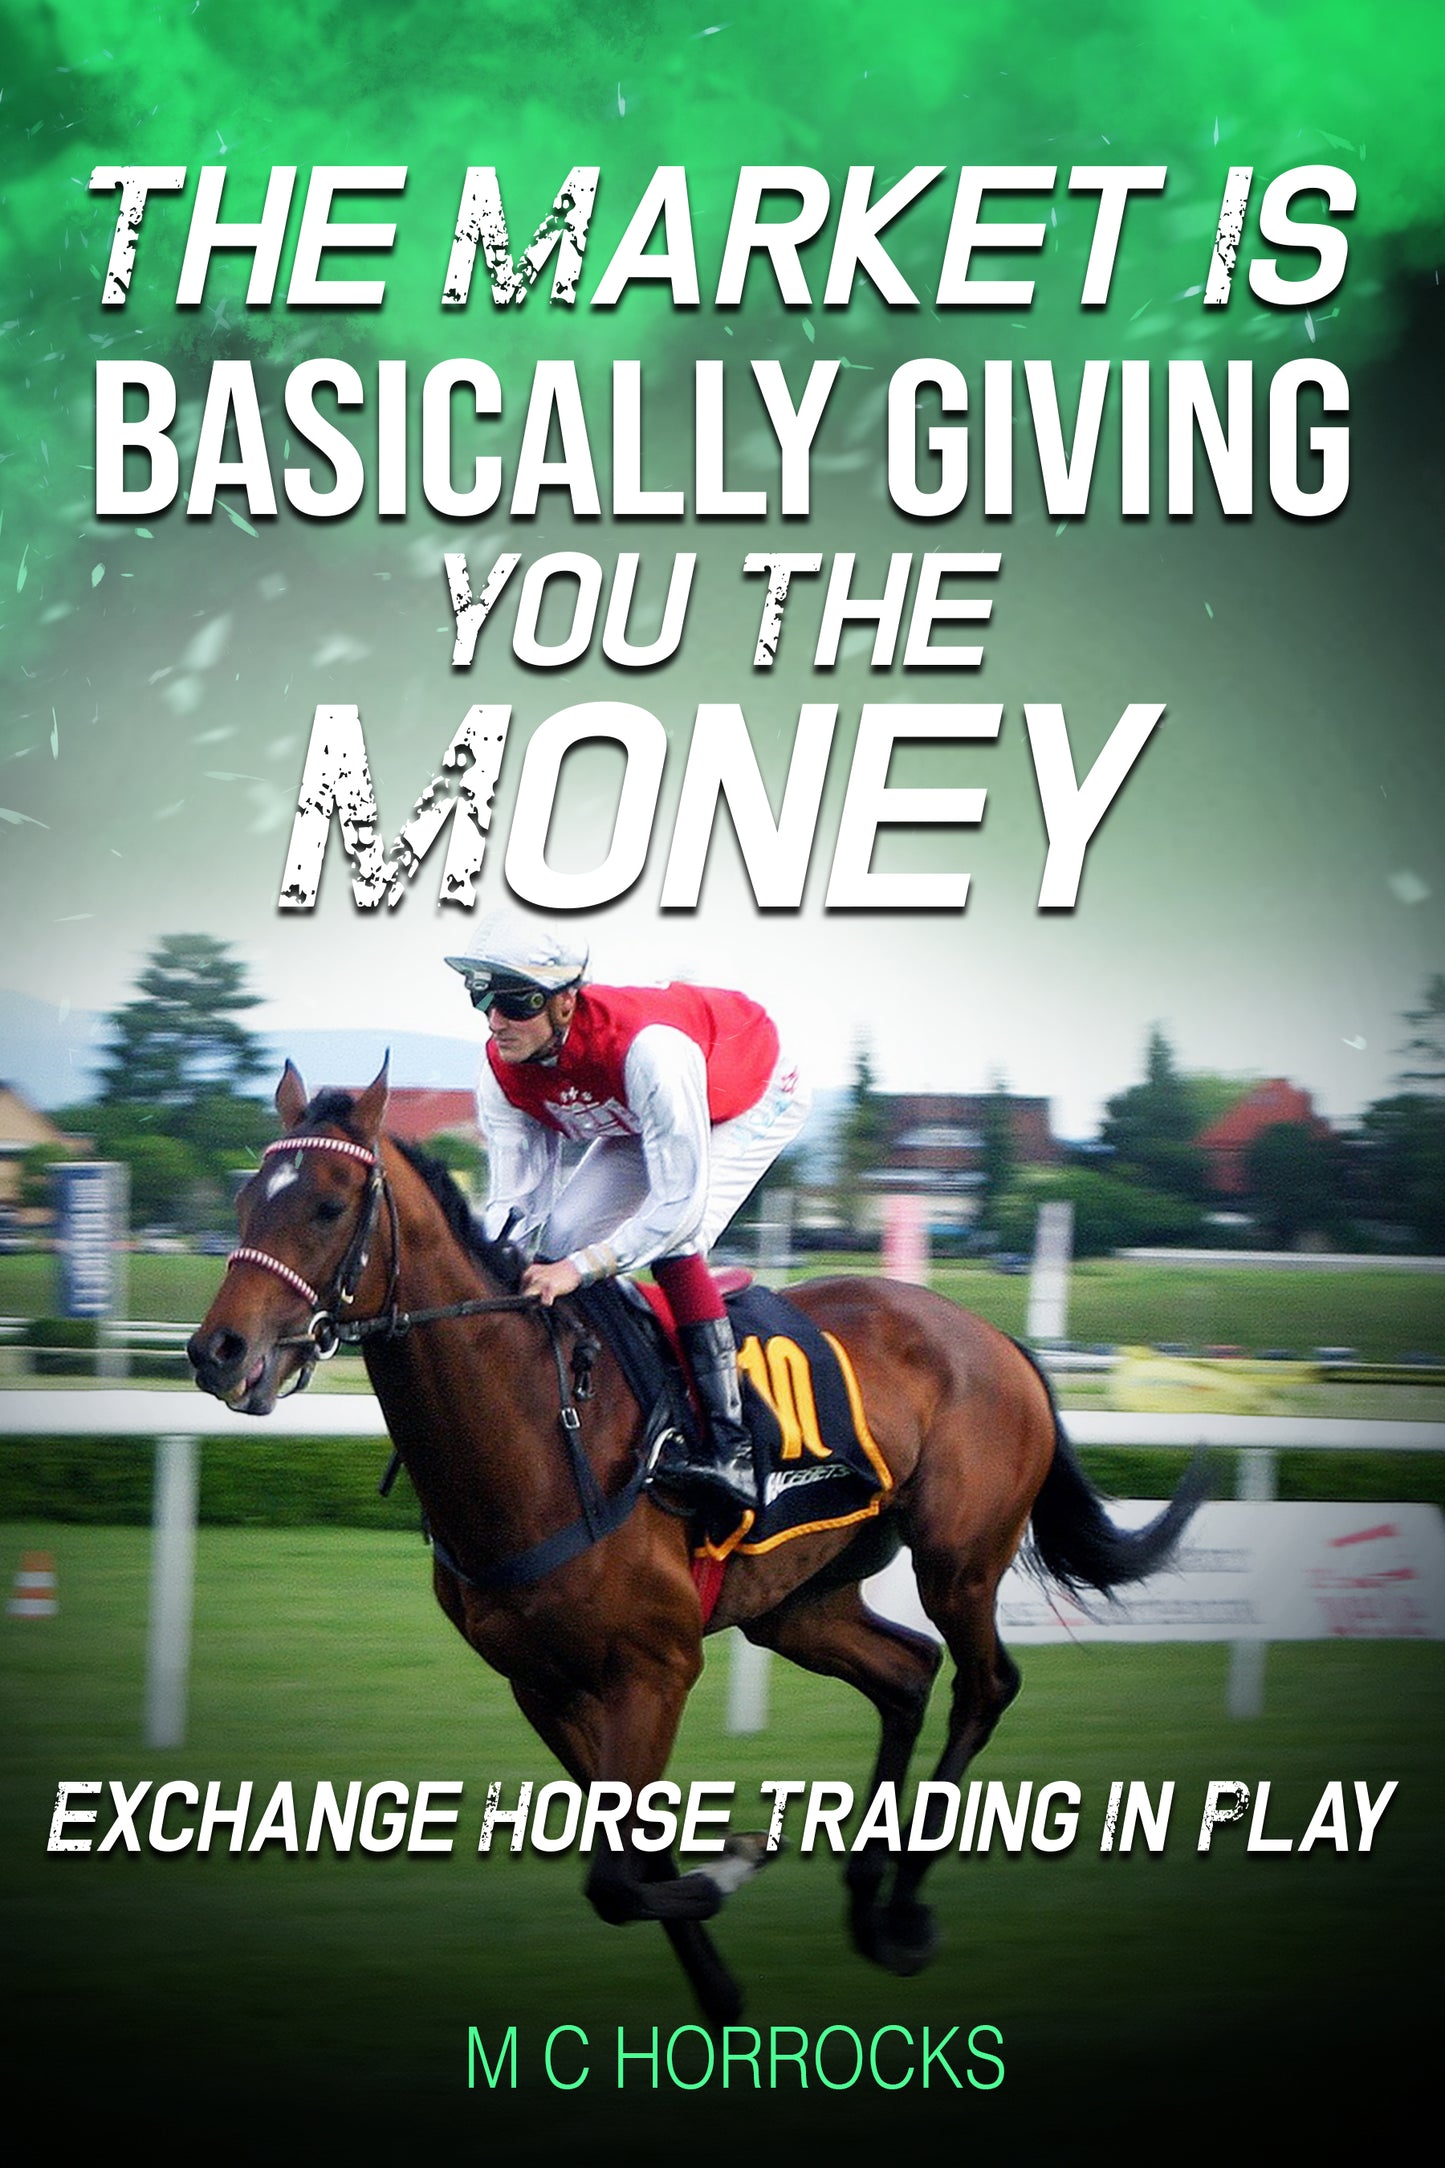 Exchange Horse Trading Book - The Market Is Basically Giving You The Money